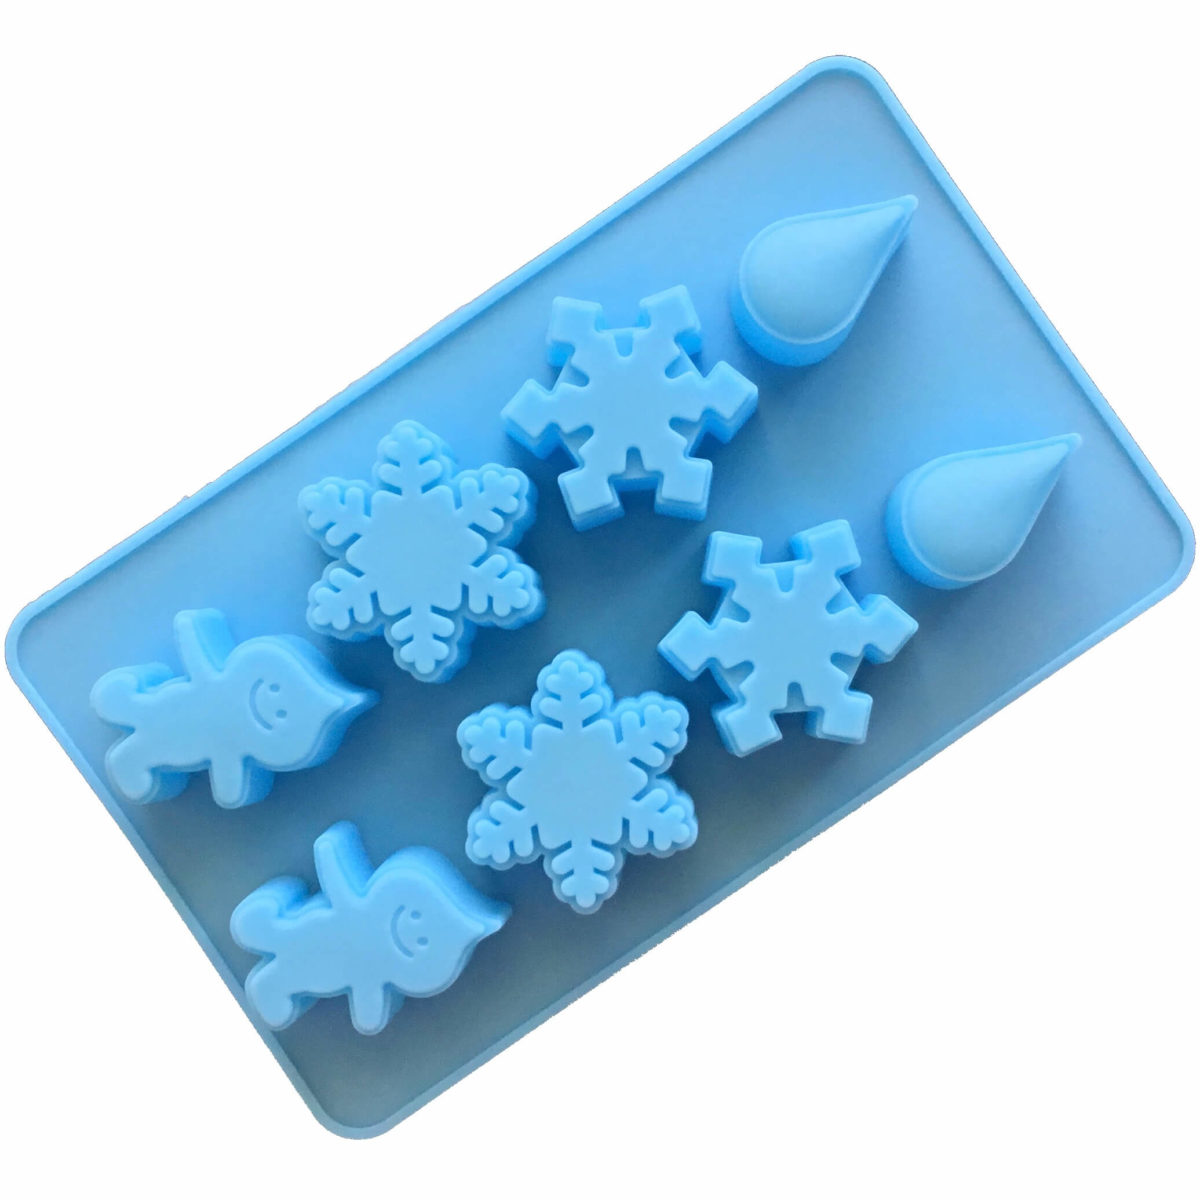 small blue silicone mould with eight cavites - two each of water drop, snow crystal, snowflake and water nymph